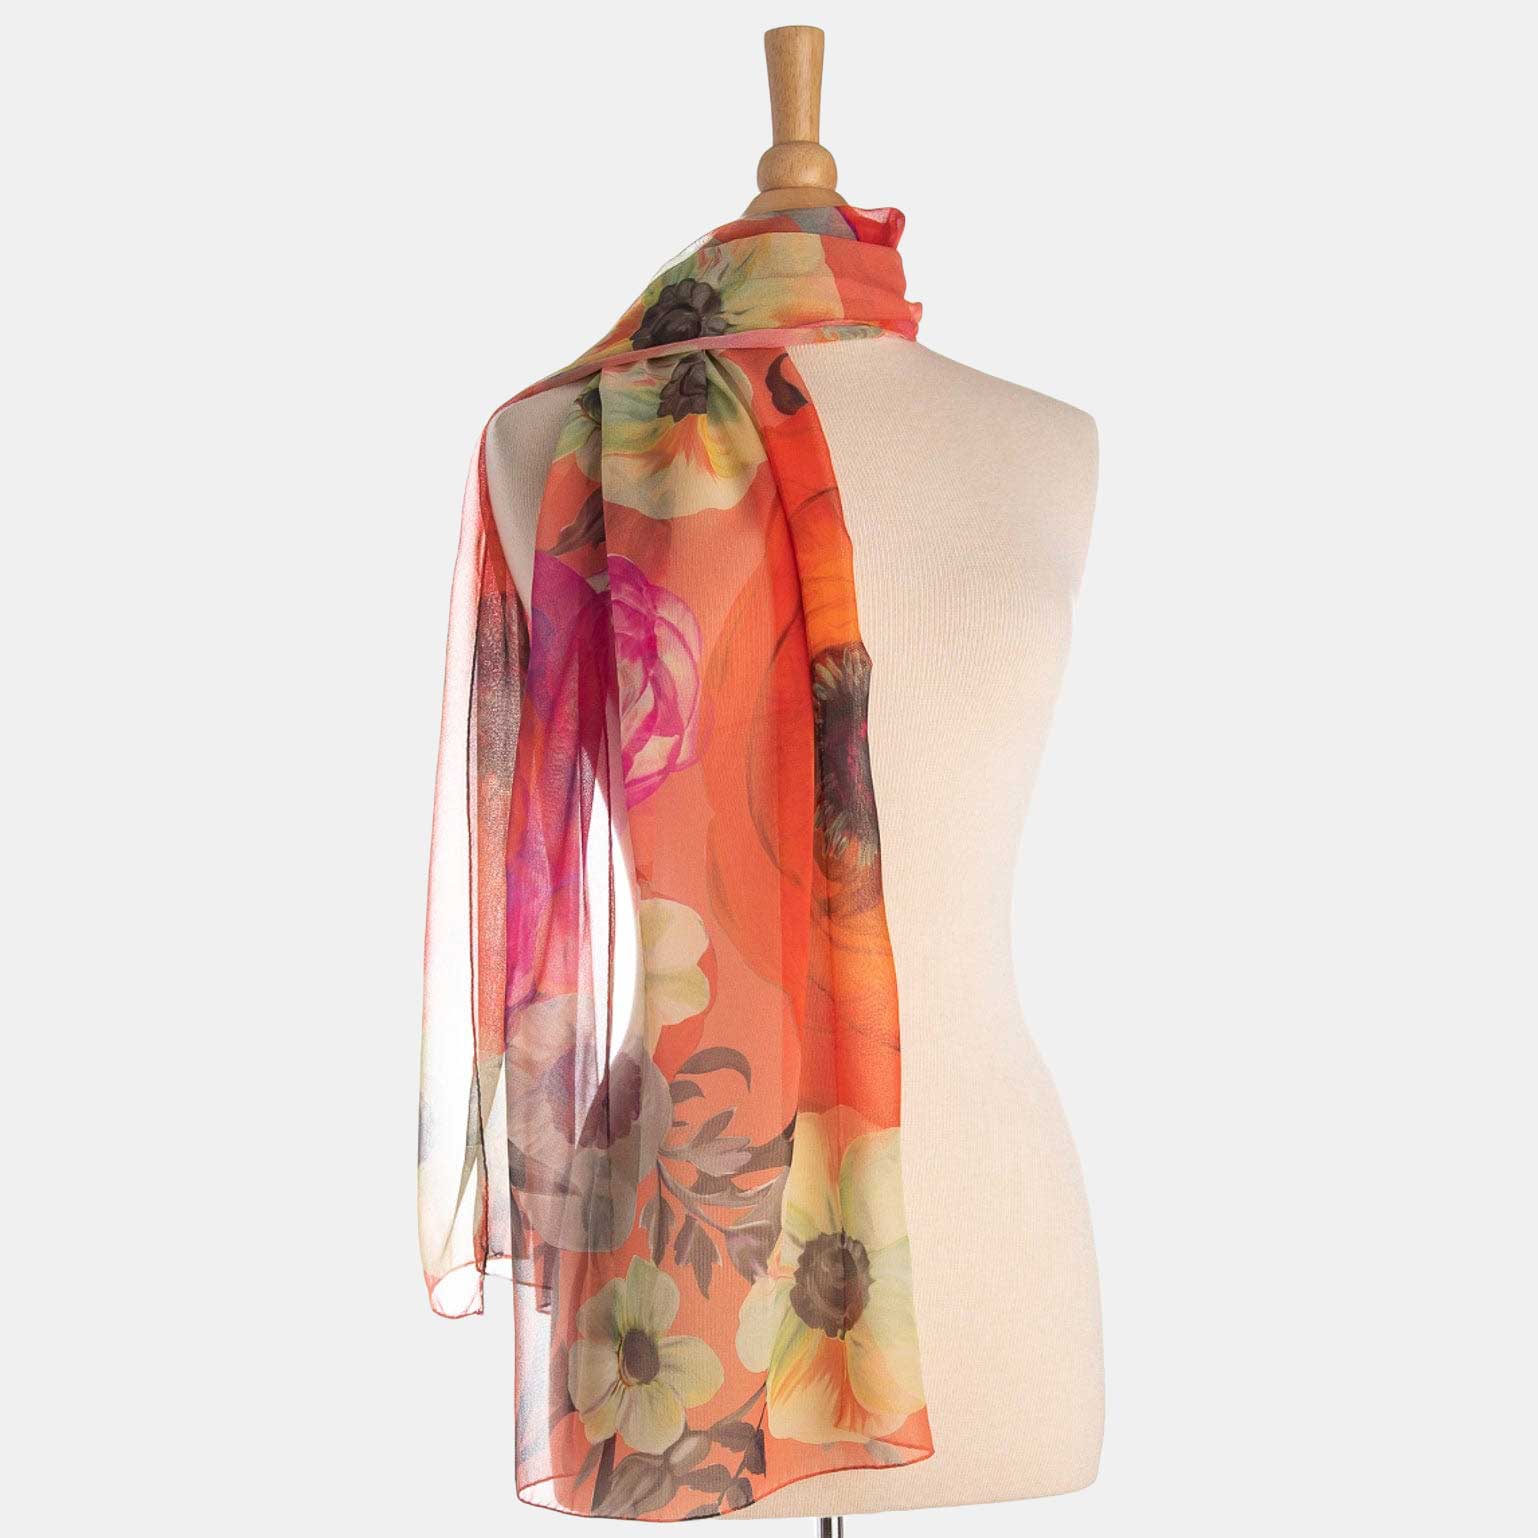 ONE ECHELON Satin Silk Scarf for Women Lightweight Fashion Scarves, Wrap in  Print Floral Pattern, Pack of 2 (White & Peach and Boho Orange)